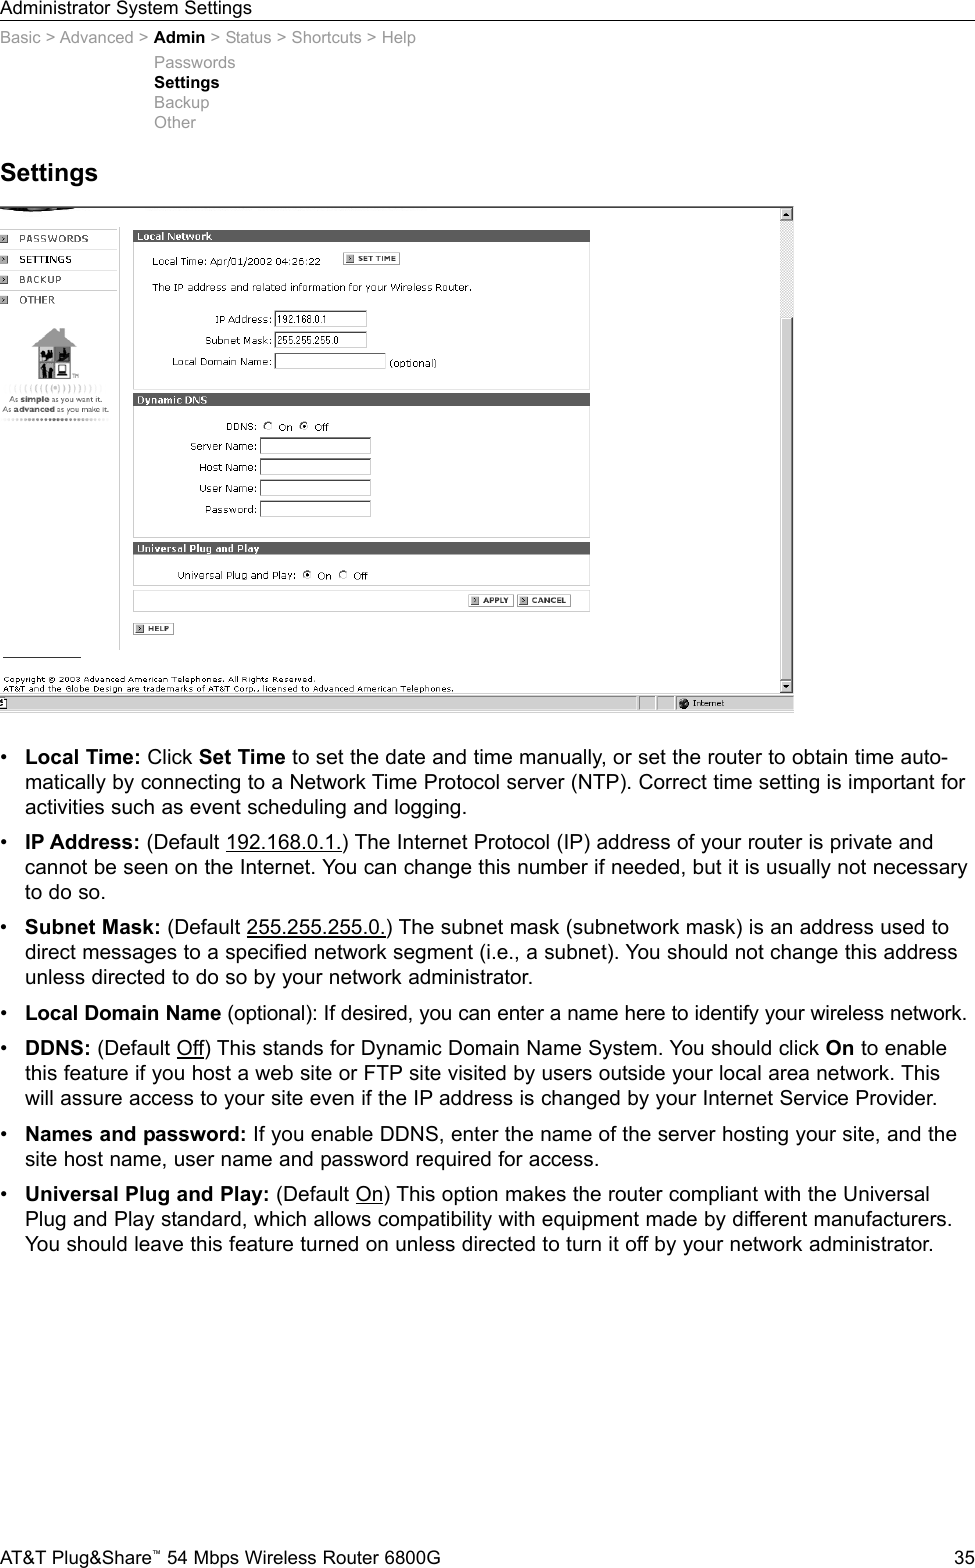 Administrator System SettingsAT&amp;T Plug&amp;Share™54 Mbps Wireless Router 6800G 35SettingsBasic &gt; Advanced &gt; Admin &gt; Status &gt; Shortcuts &gt; Help•Local Time: Click Set Time to set the date and time manually, or set the router to obtain time auto-matically by connecting to a Network Time Protocol server (NTP). Correct time setting is important foractivities such as event scheduling and logging.•IP Address: (Default 192.168.0.1.) The Internet Protocol (IP) address of your router is private and cannot be seen on the Internet. You can change this number if needed, but it is usually not necessaryto do so.•Subnet Mask: (Default 255.255.255.0.) The subnet mask (subnetwork mask) is an address used todirect messages to a specified network segment (i.e., a subnet). You should not change this addressunless directed to do so by your network administrator.•Local Domain Name (optional): If desired, you can enter a name here to identify your wireless network.•DDNS: (Default Off) This stands for Dynamic Domain Name System. You should click On to enablethis feature if you host a web site or FTP site visited by users outside your local area network. Thiswill assure access to your site even if the IP address is changed by your Internet Service Provider.•Names and password: If you enable DDNS, enter the name of the server hosting your site, and thesite host name, user name and password required for access.•Universal Plug and Play: (Default On) This option makes the router compliant with the UniversalPlug and Play standard, which allows compatibility with equipment made by different manufacturers.You should leave this feature turned on unless directed to turn it off by your network administrator.PasswordsSettingsBackupOther